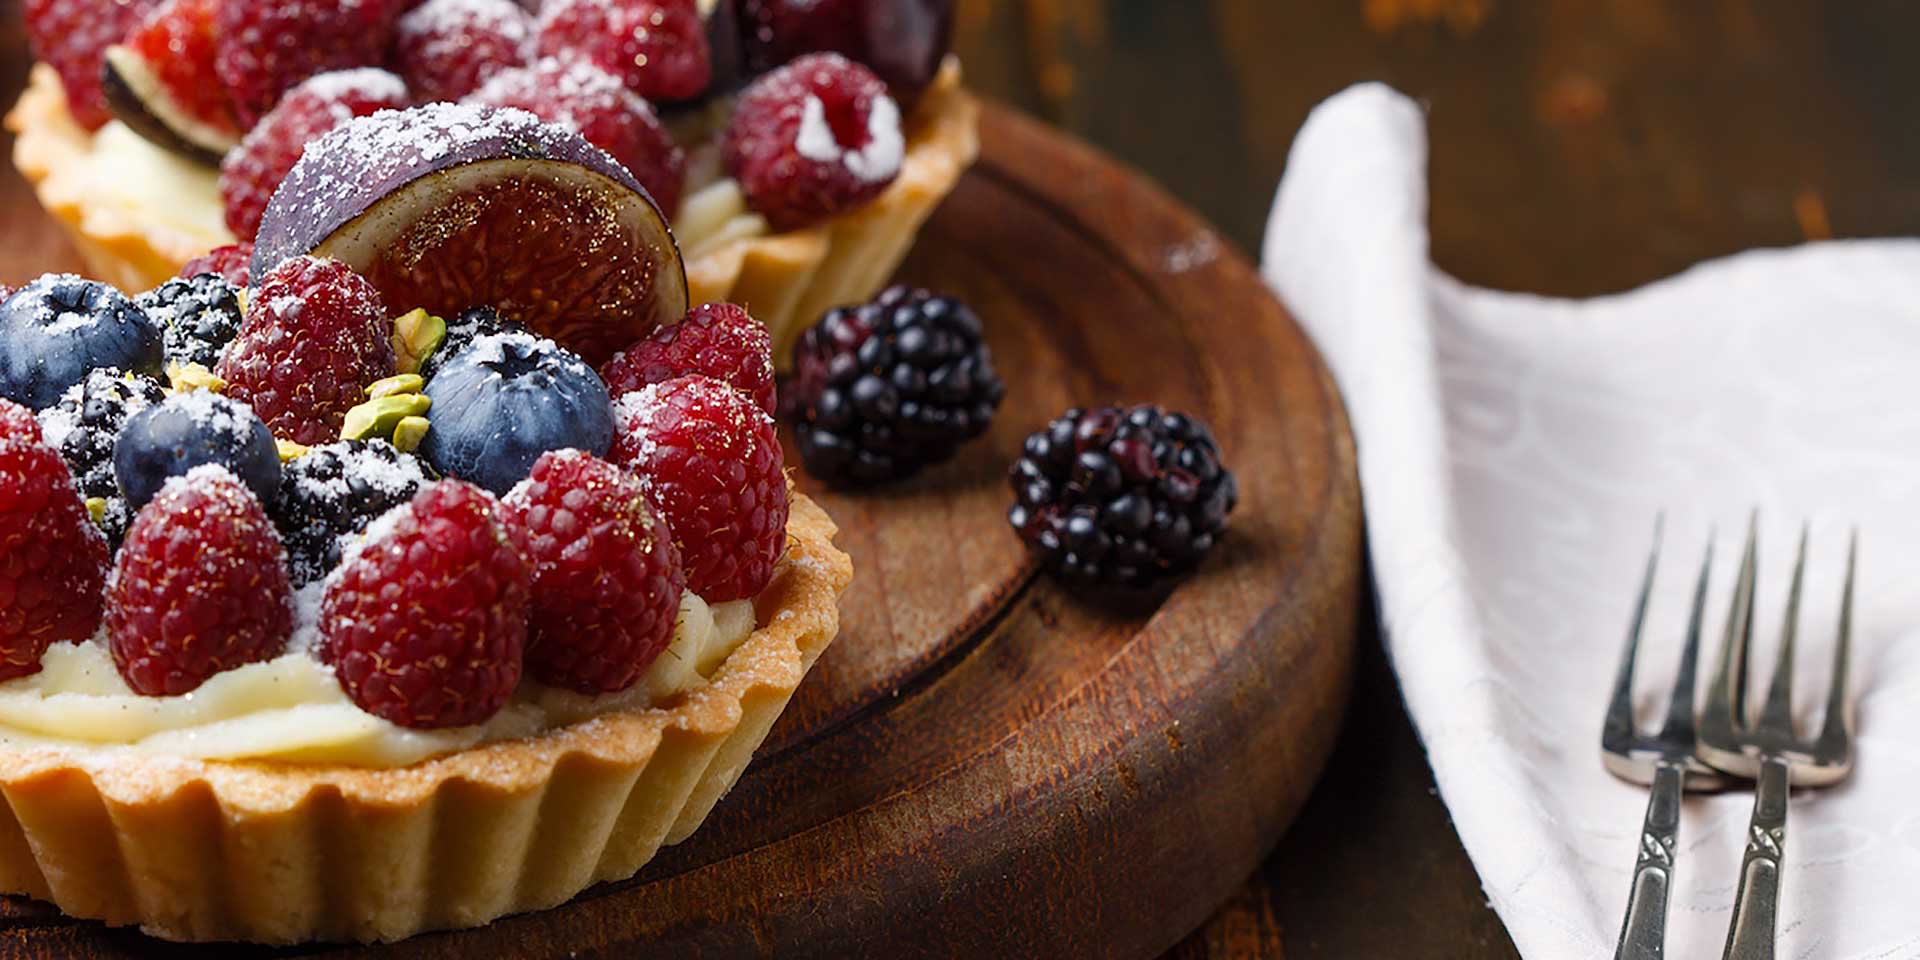 Delicious Mini Tarts with Fresh Berries and Custard